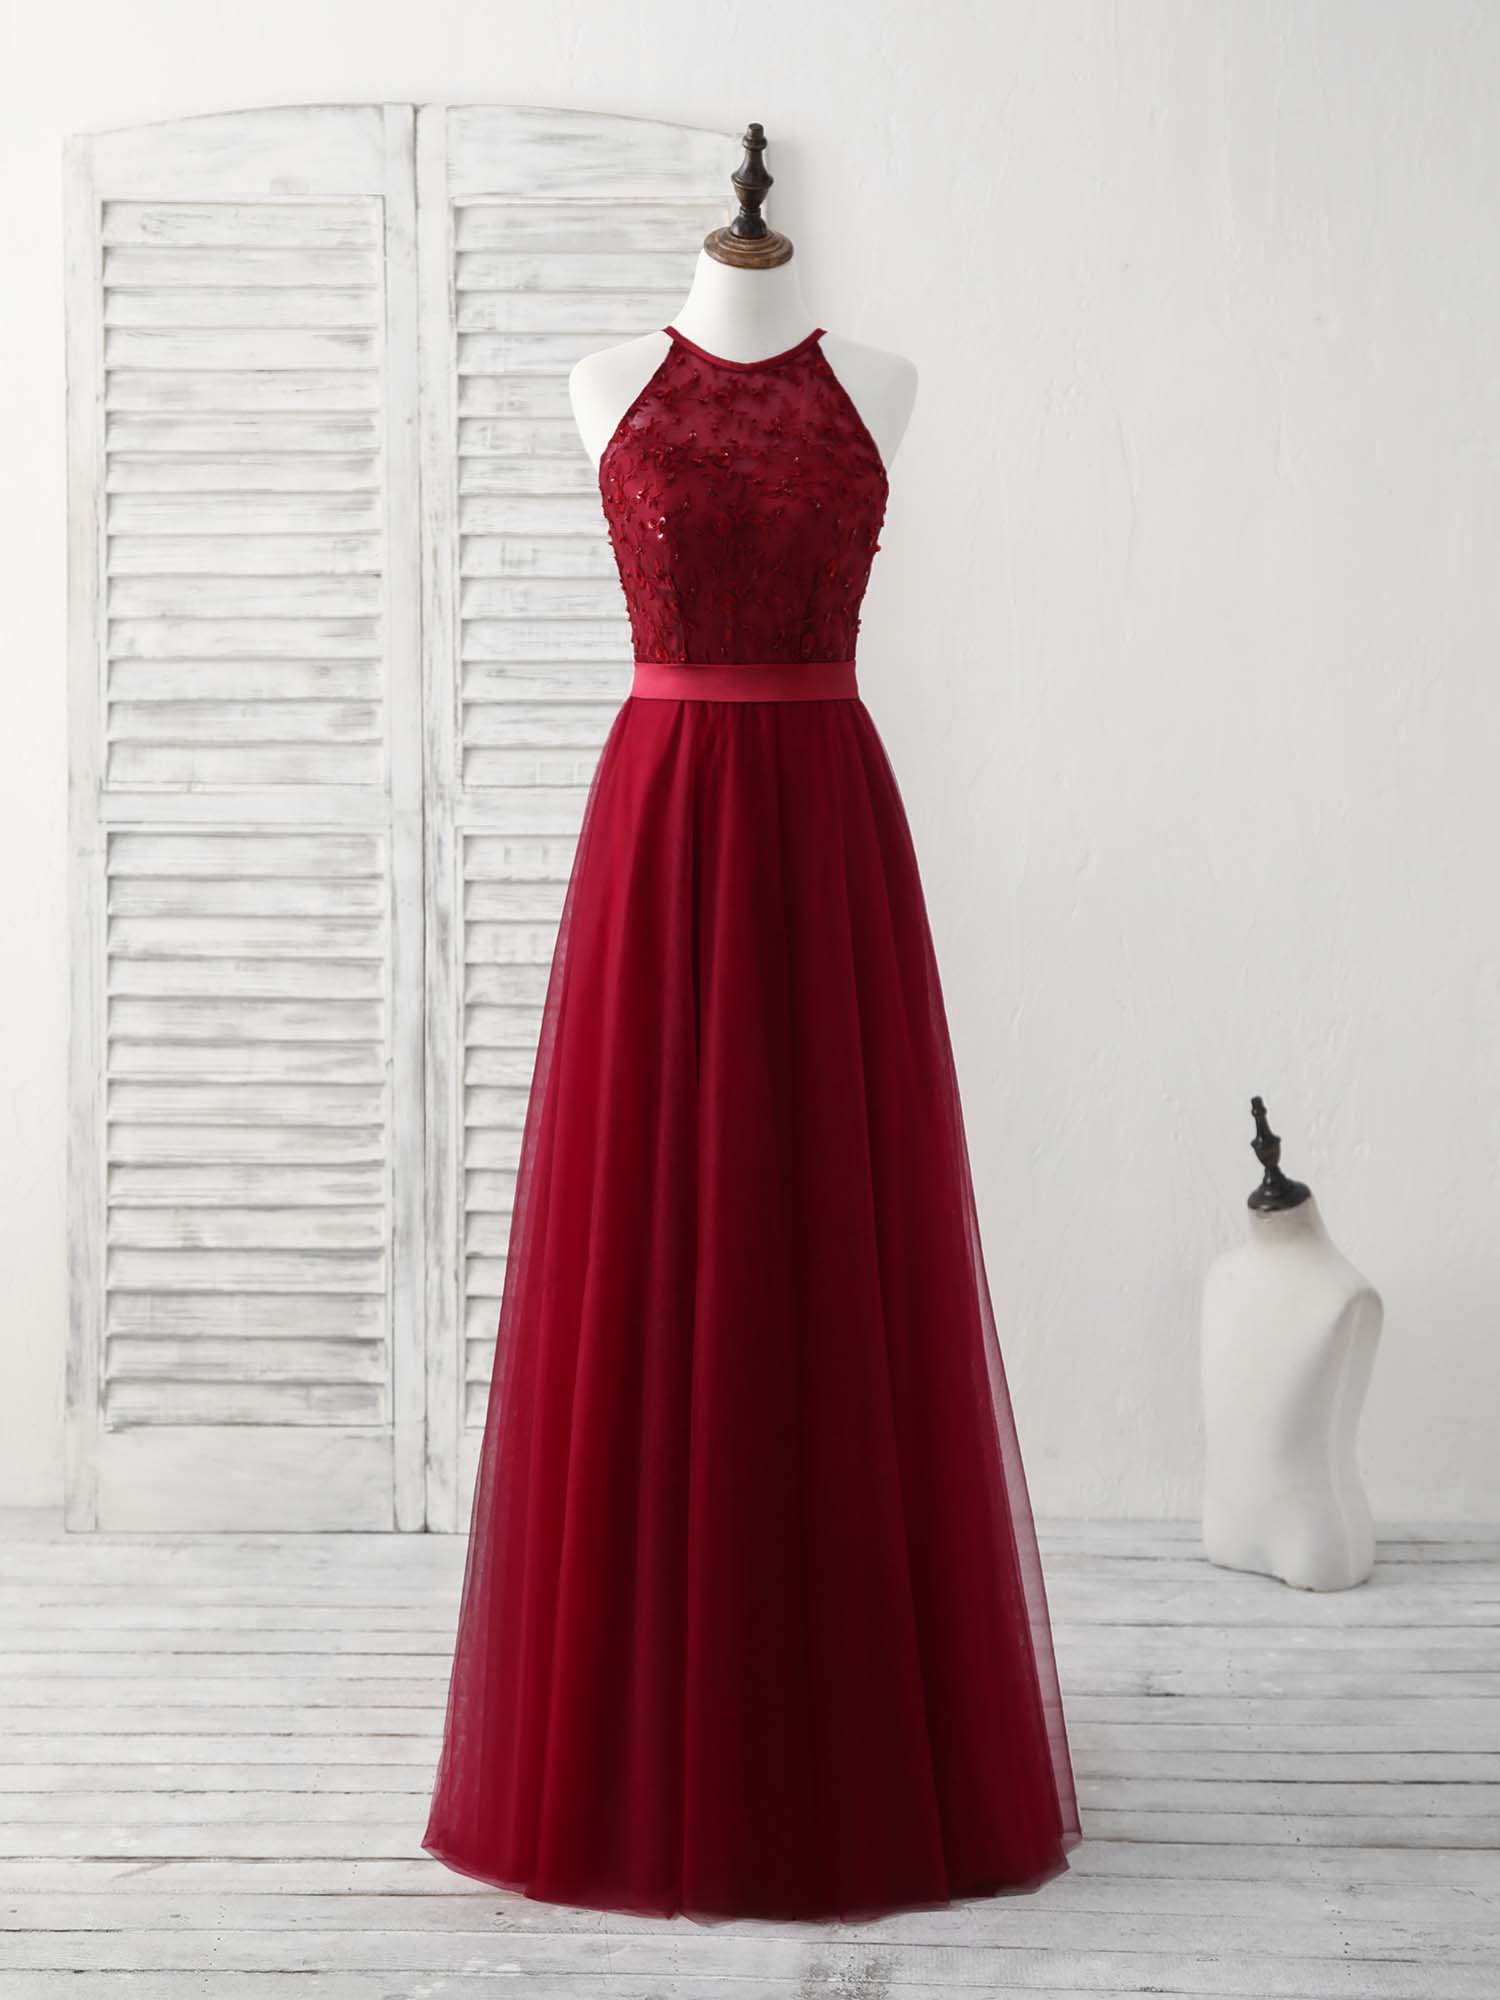 Party Dresses And Tops, Burgundy Tulle Lace Long Prom Dress, Burgundy Bridesmaid Dress